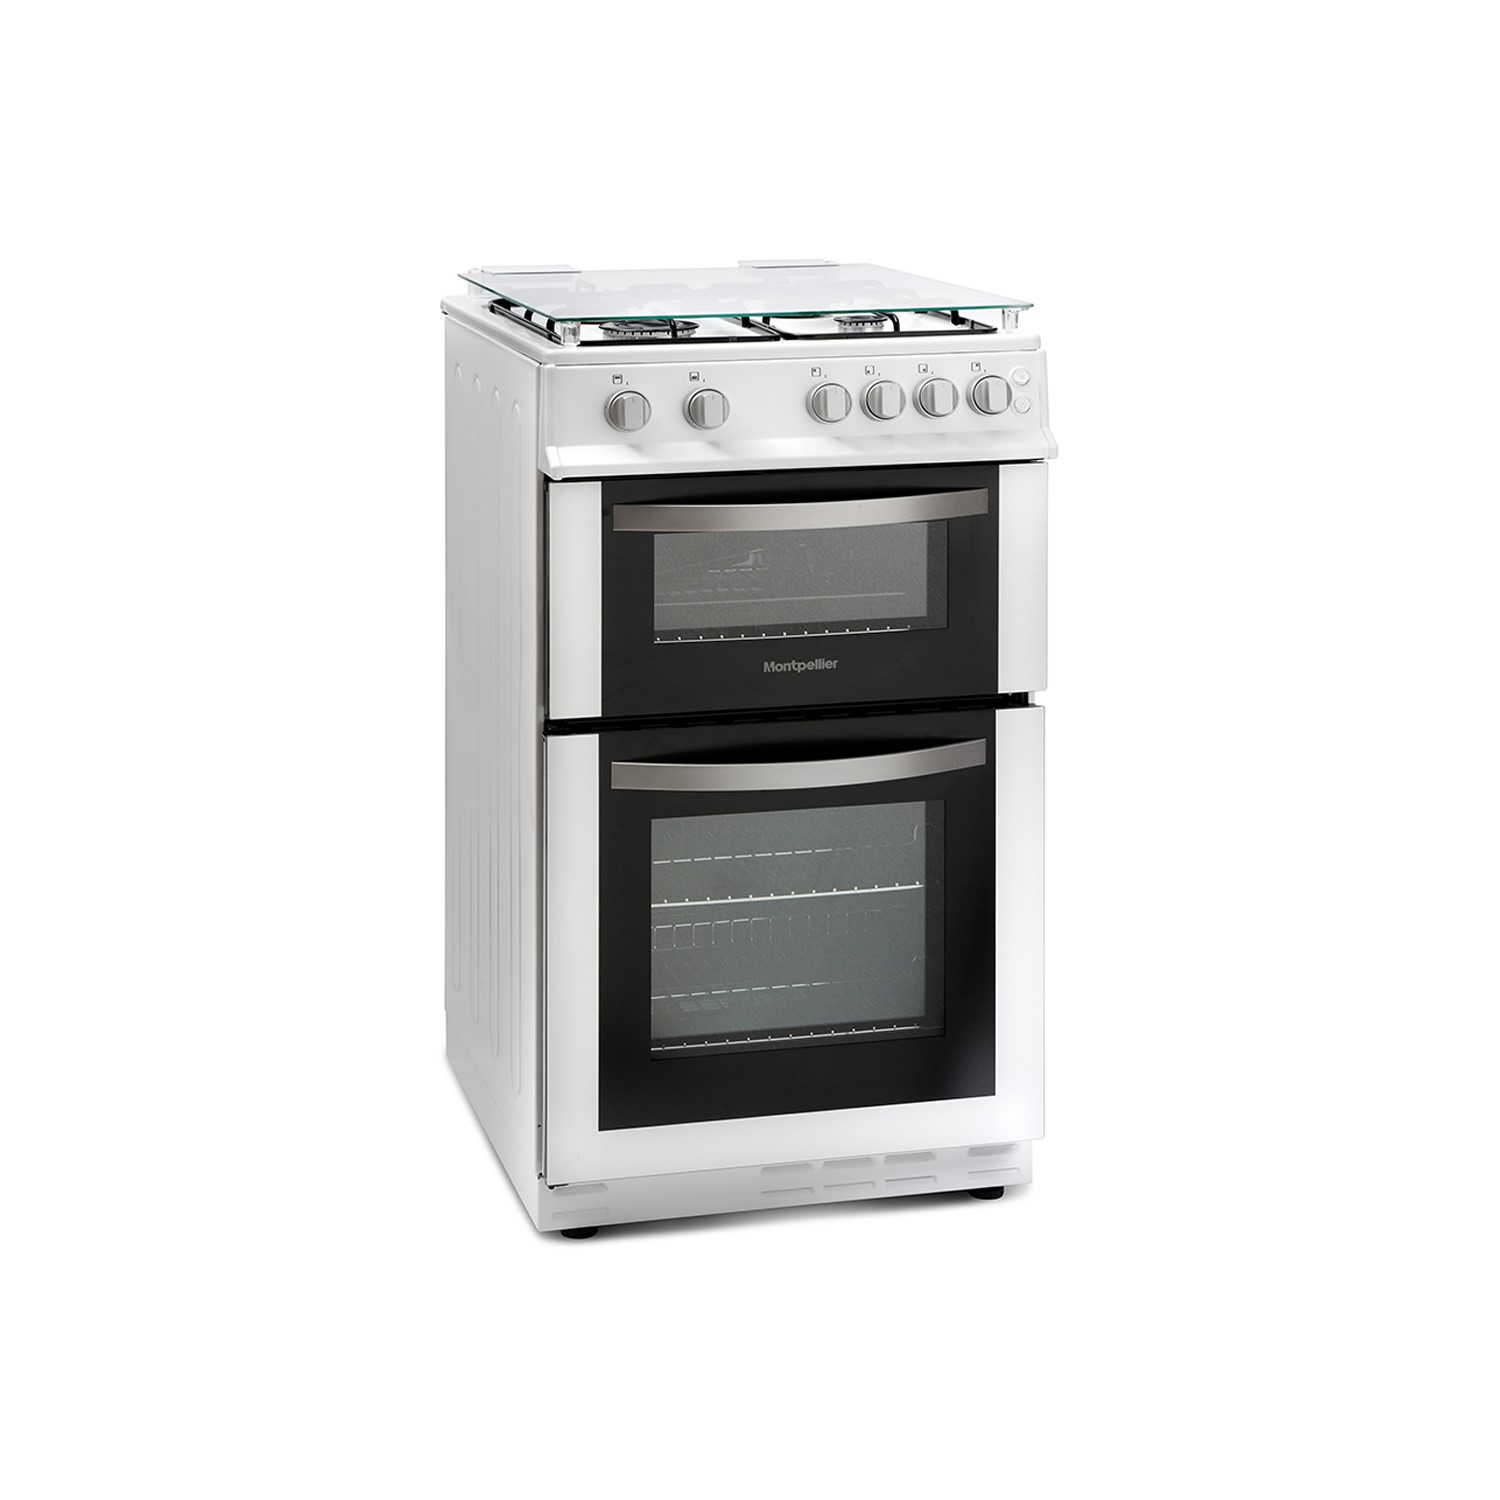 Montpellier Mdg500lw 50cm Double Oven Gas Cooker With Lid White